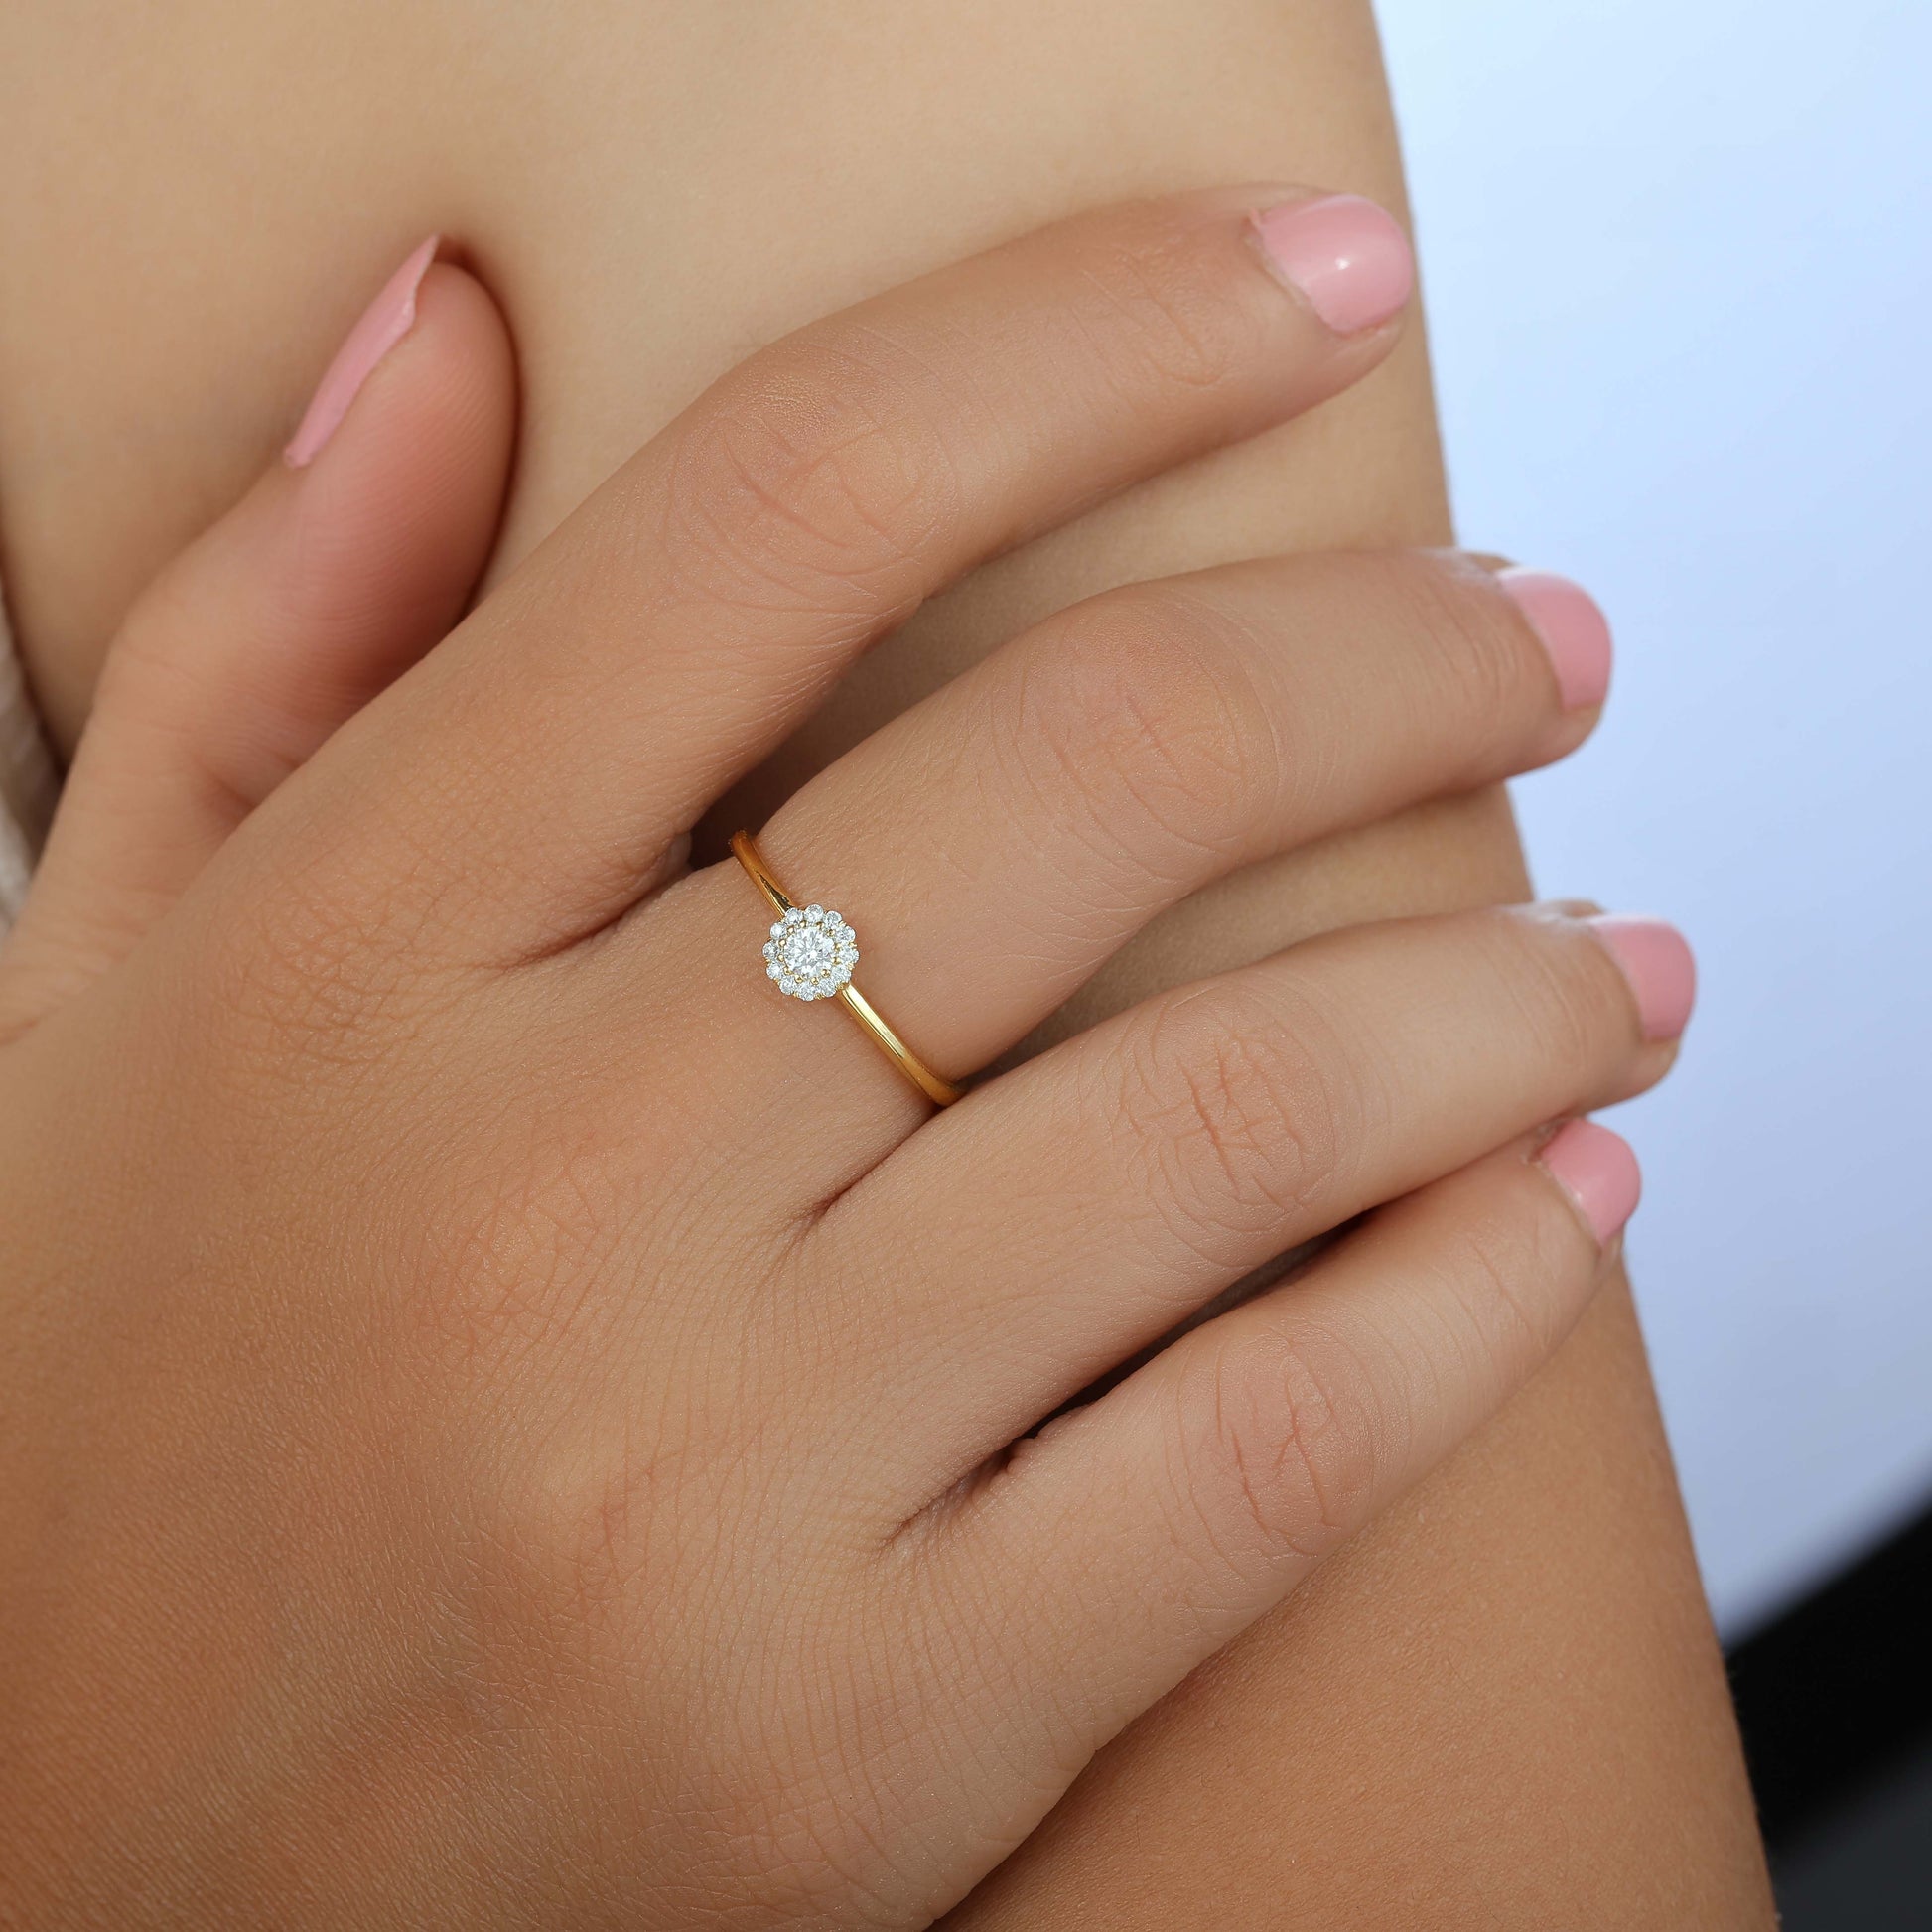 Petite Halo Moissanite Ring wearing by a girl